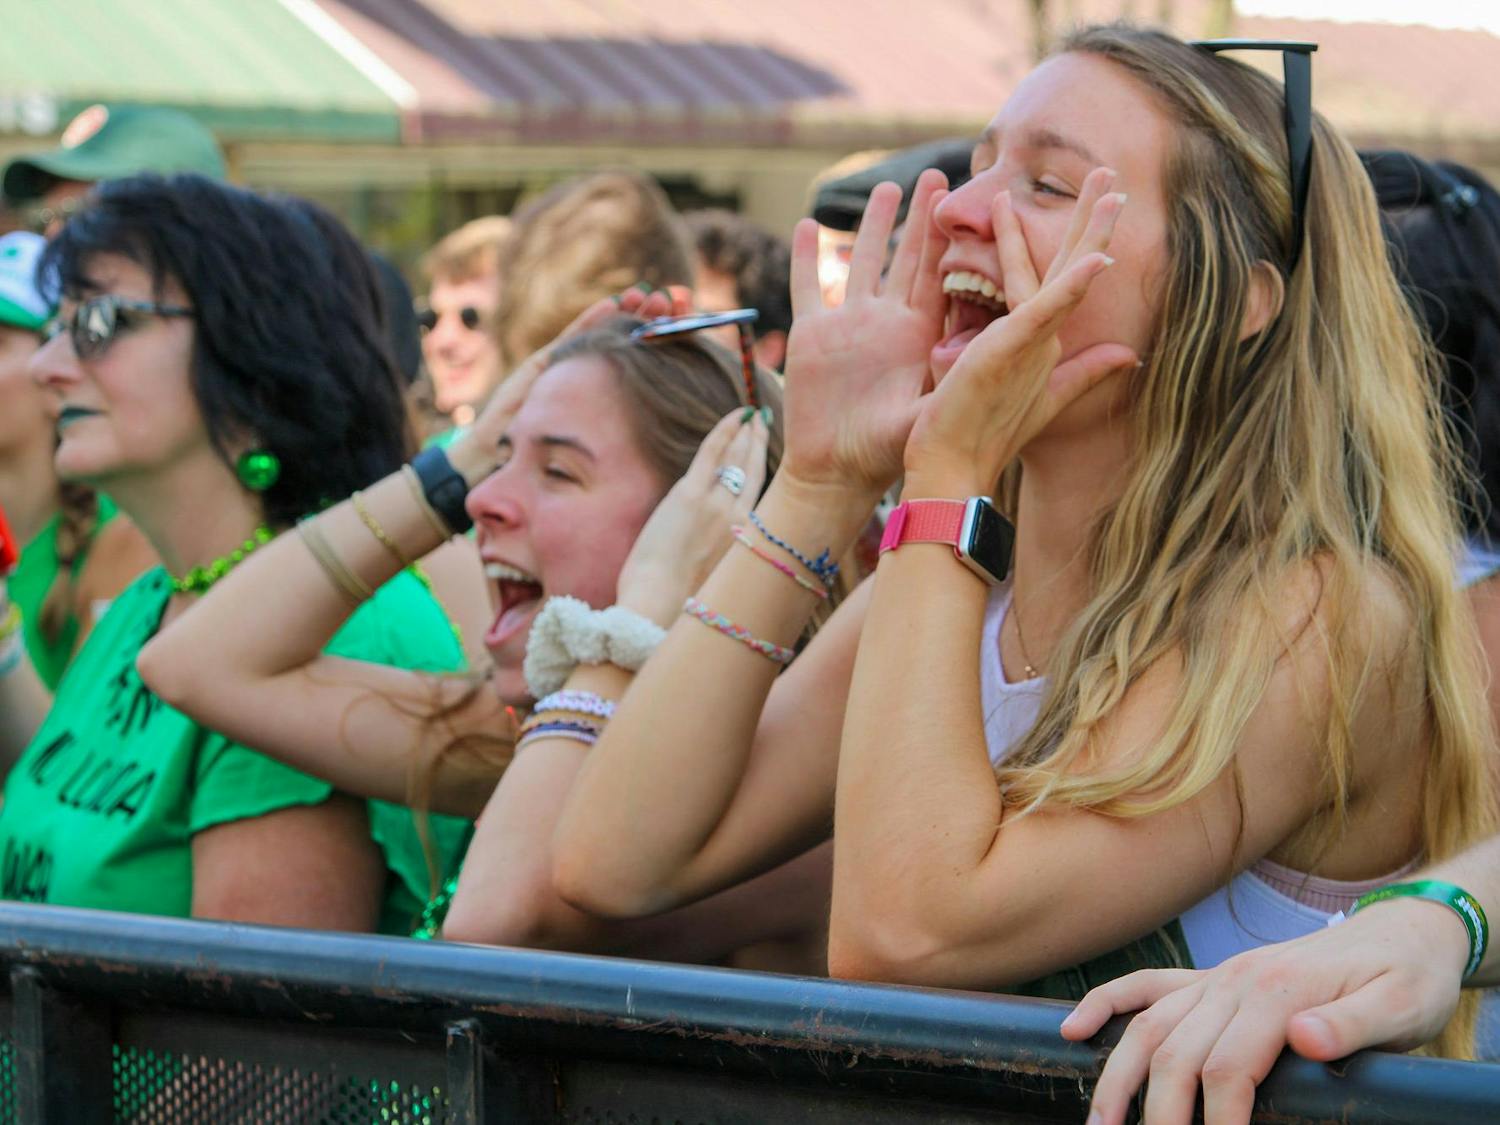 Third-year student Ramsey McIntyre cheers as the band Happy Landing performs during St. Pat's in Five Points in Columbia, South Carolina on March 16, 2024. The band was one of six acts to perform on the Blossom Stage.